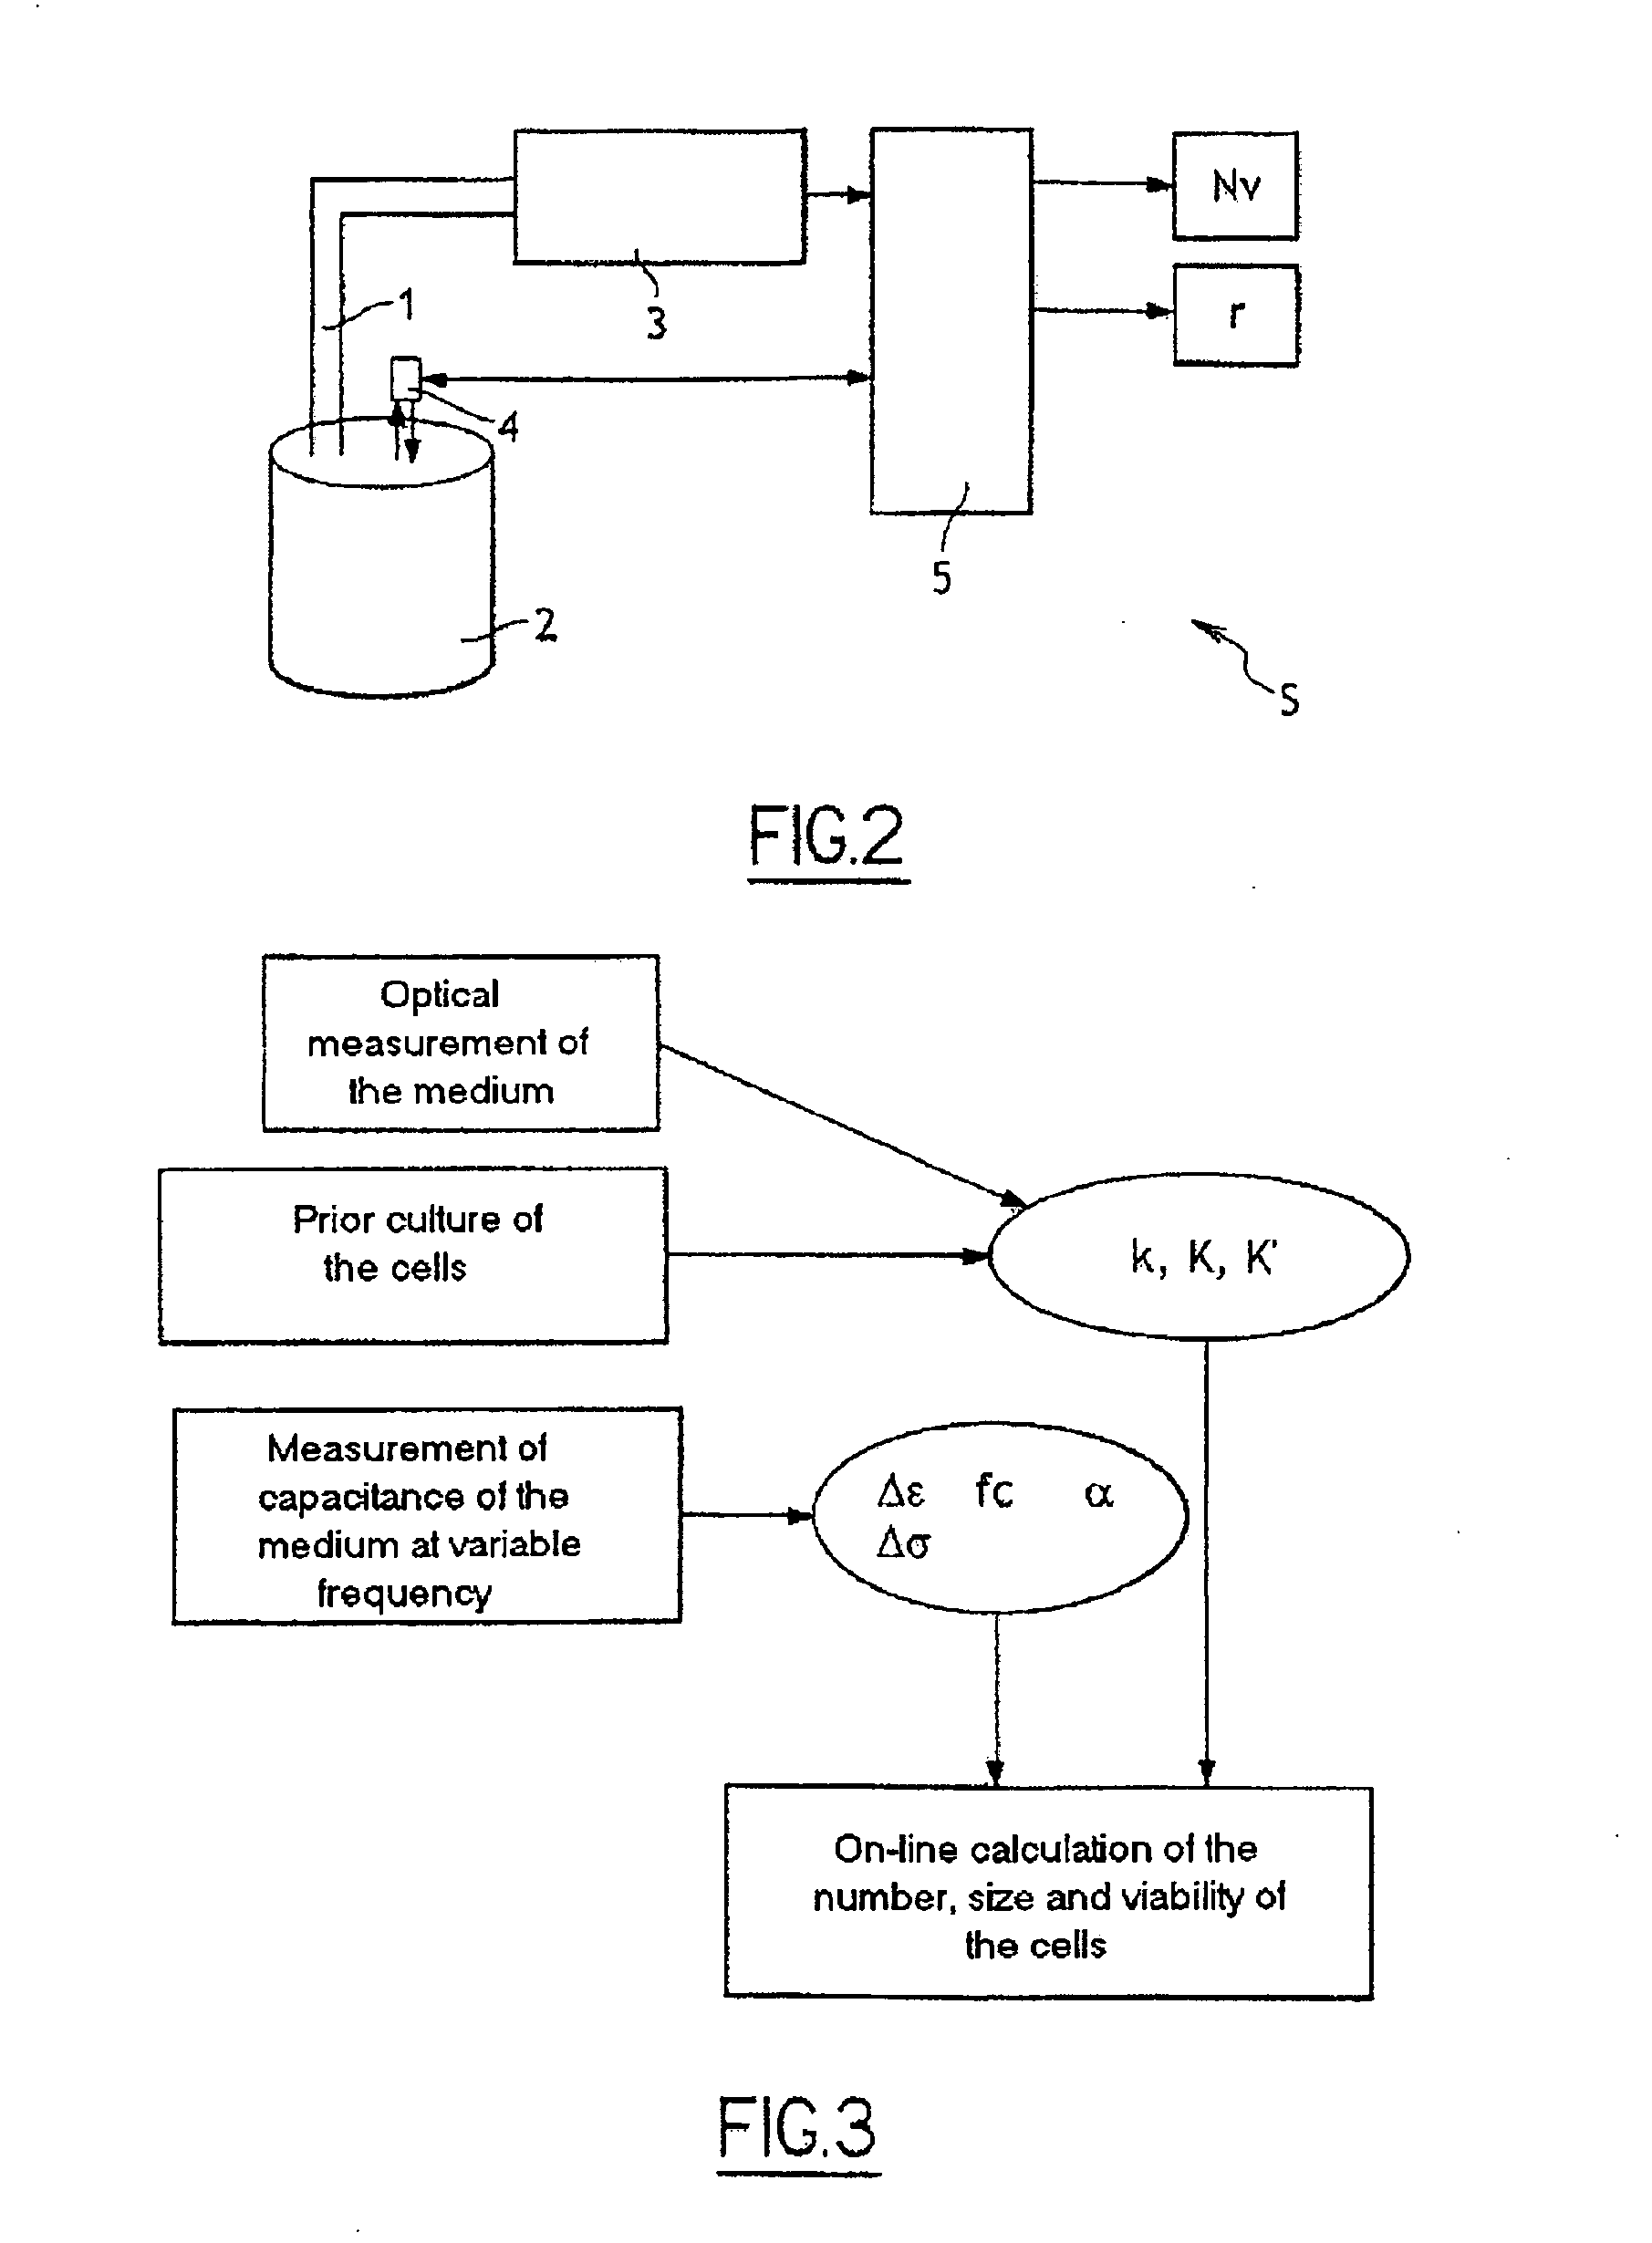 Process and system for on-line and in situ counting of cells in a biological culture medium